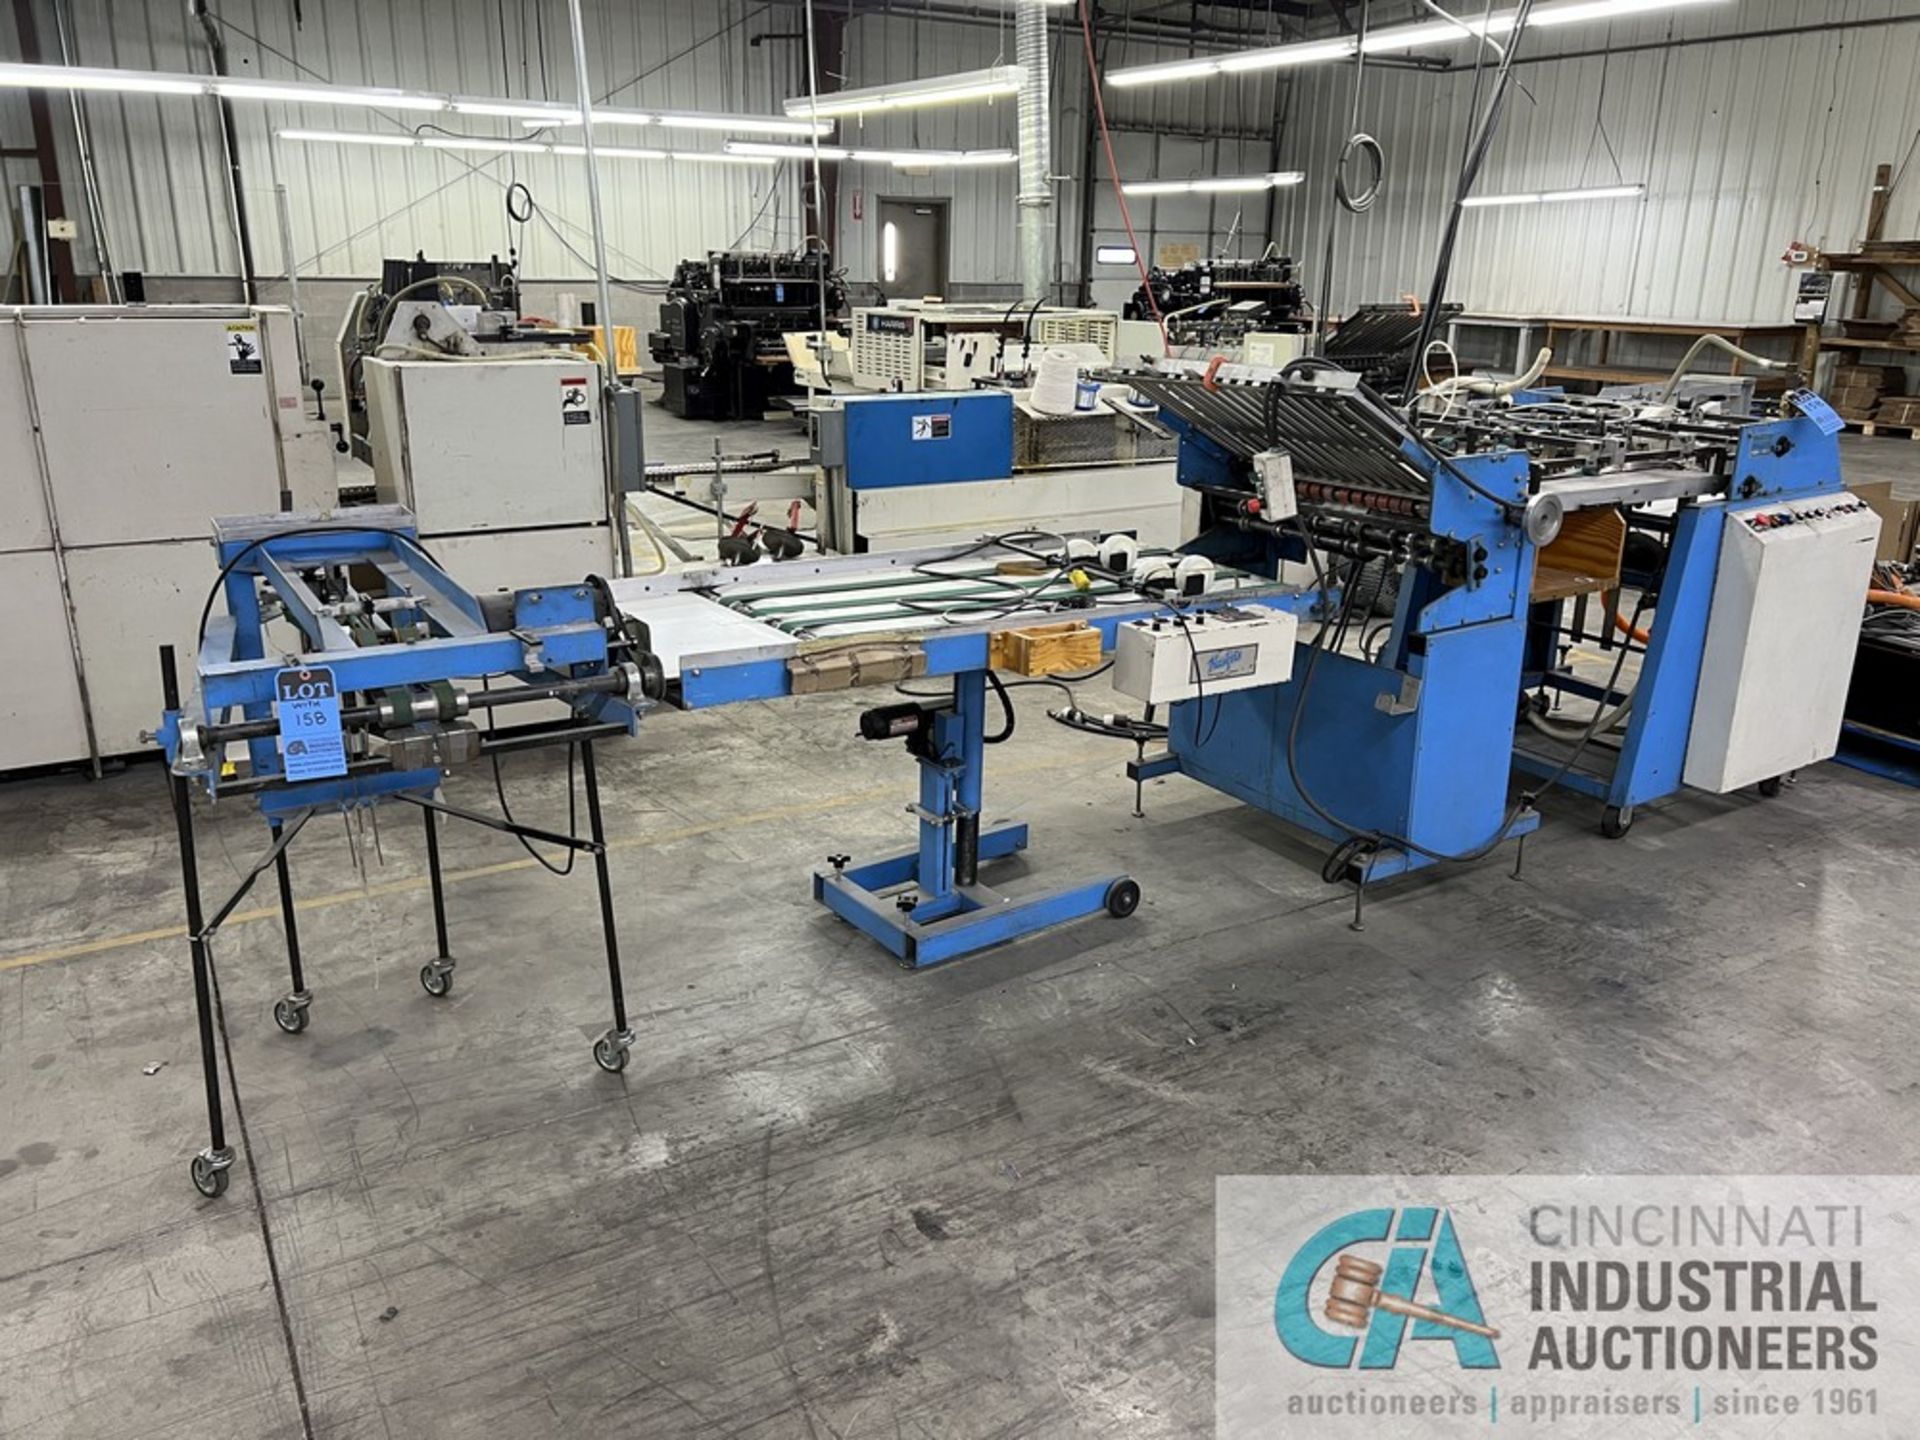 HASKINS UNIFOLD FOLDER / GLUER; S/N 9011, 2003 VS10S OUNATEC GLUER, OY2008 CONTROLLER WITH (3) - Image 3 of 25